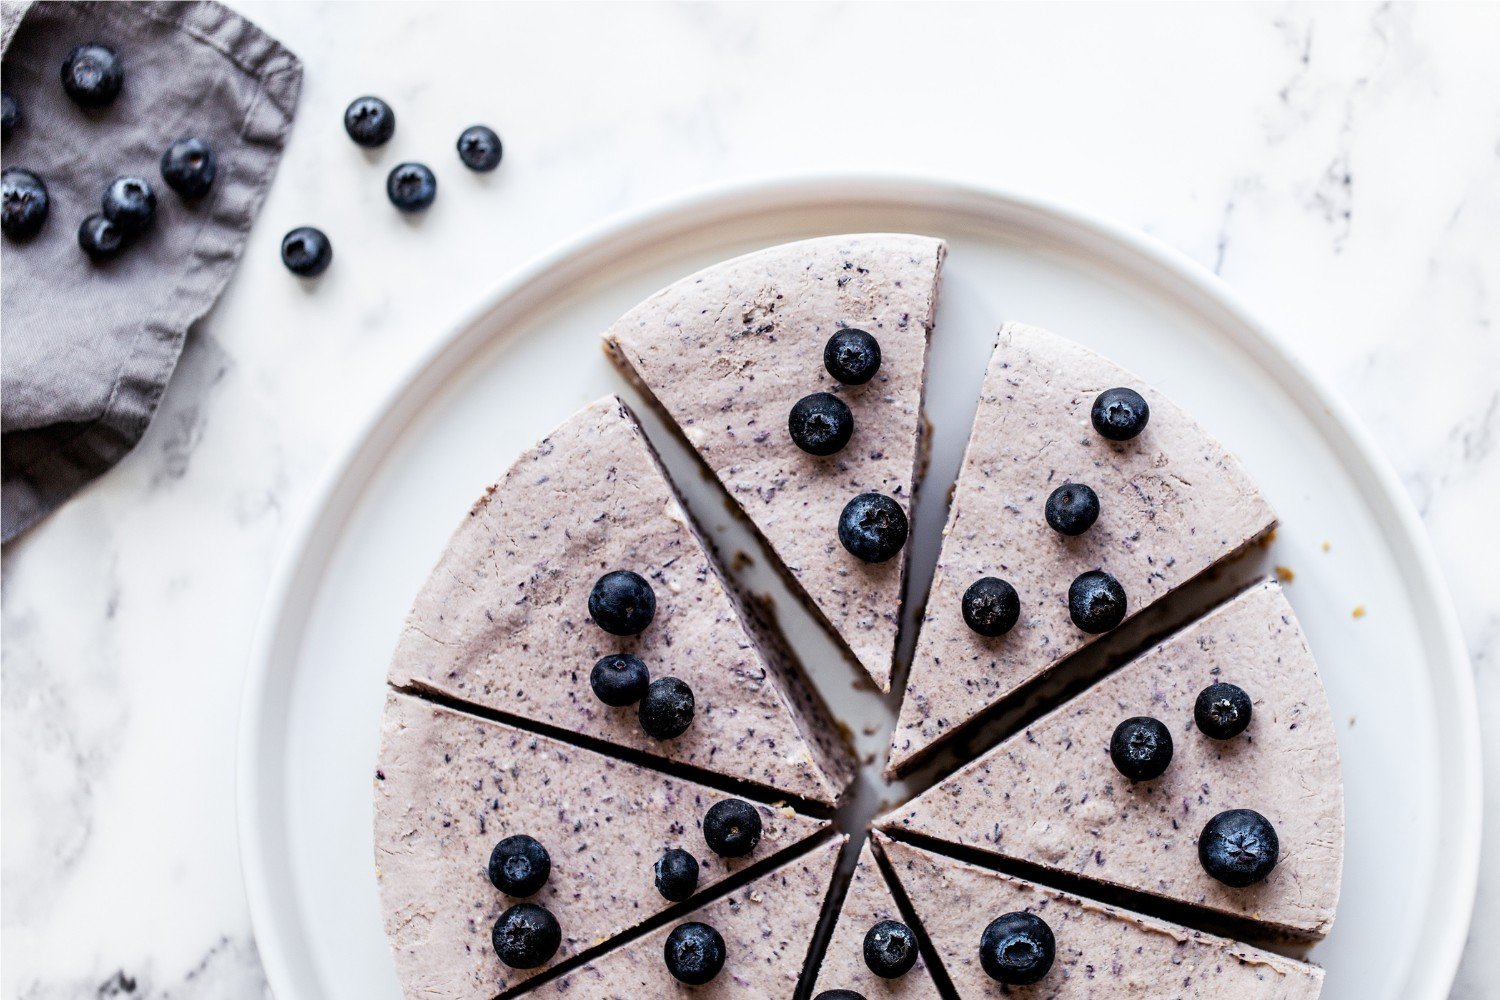 the whole pie cut into slices with a few fresh blueberries scattered on top.